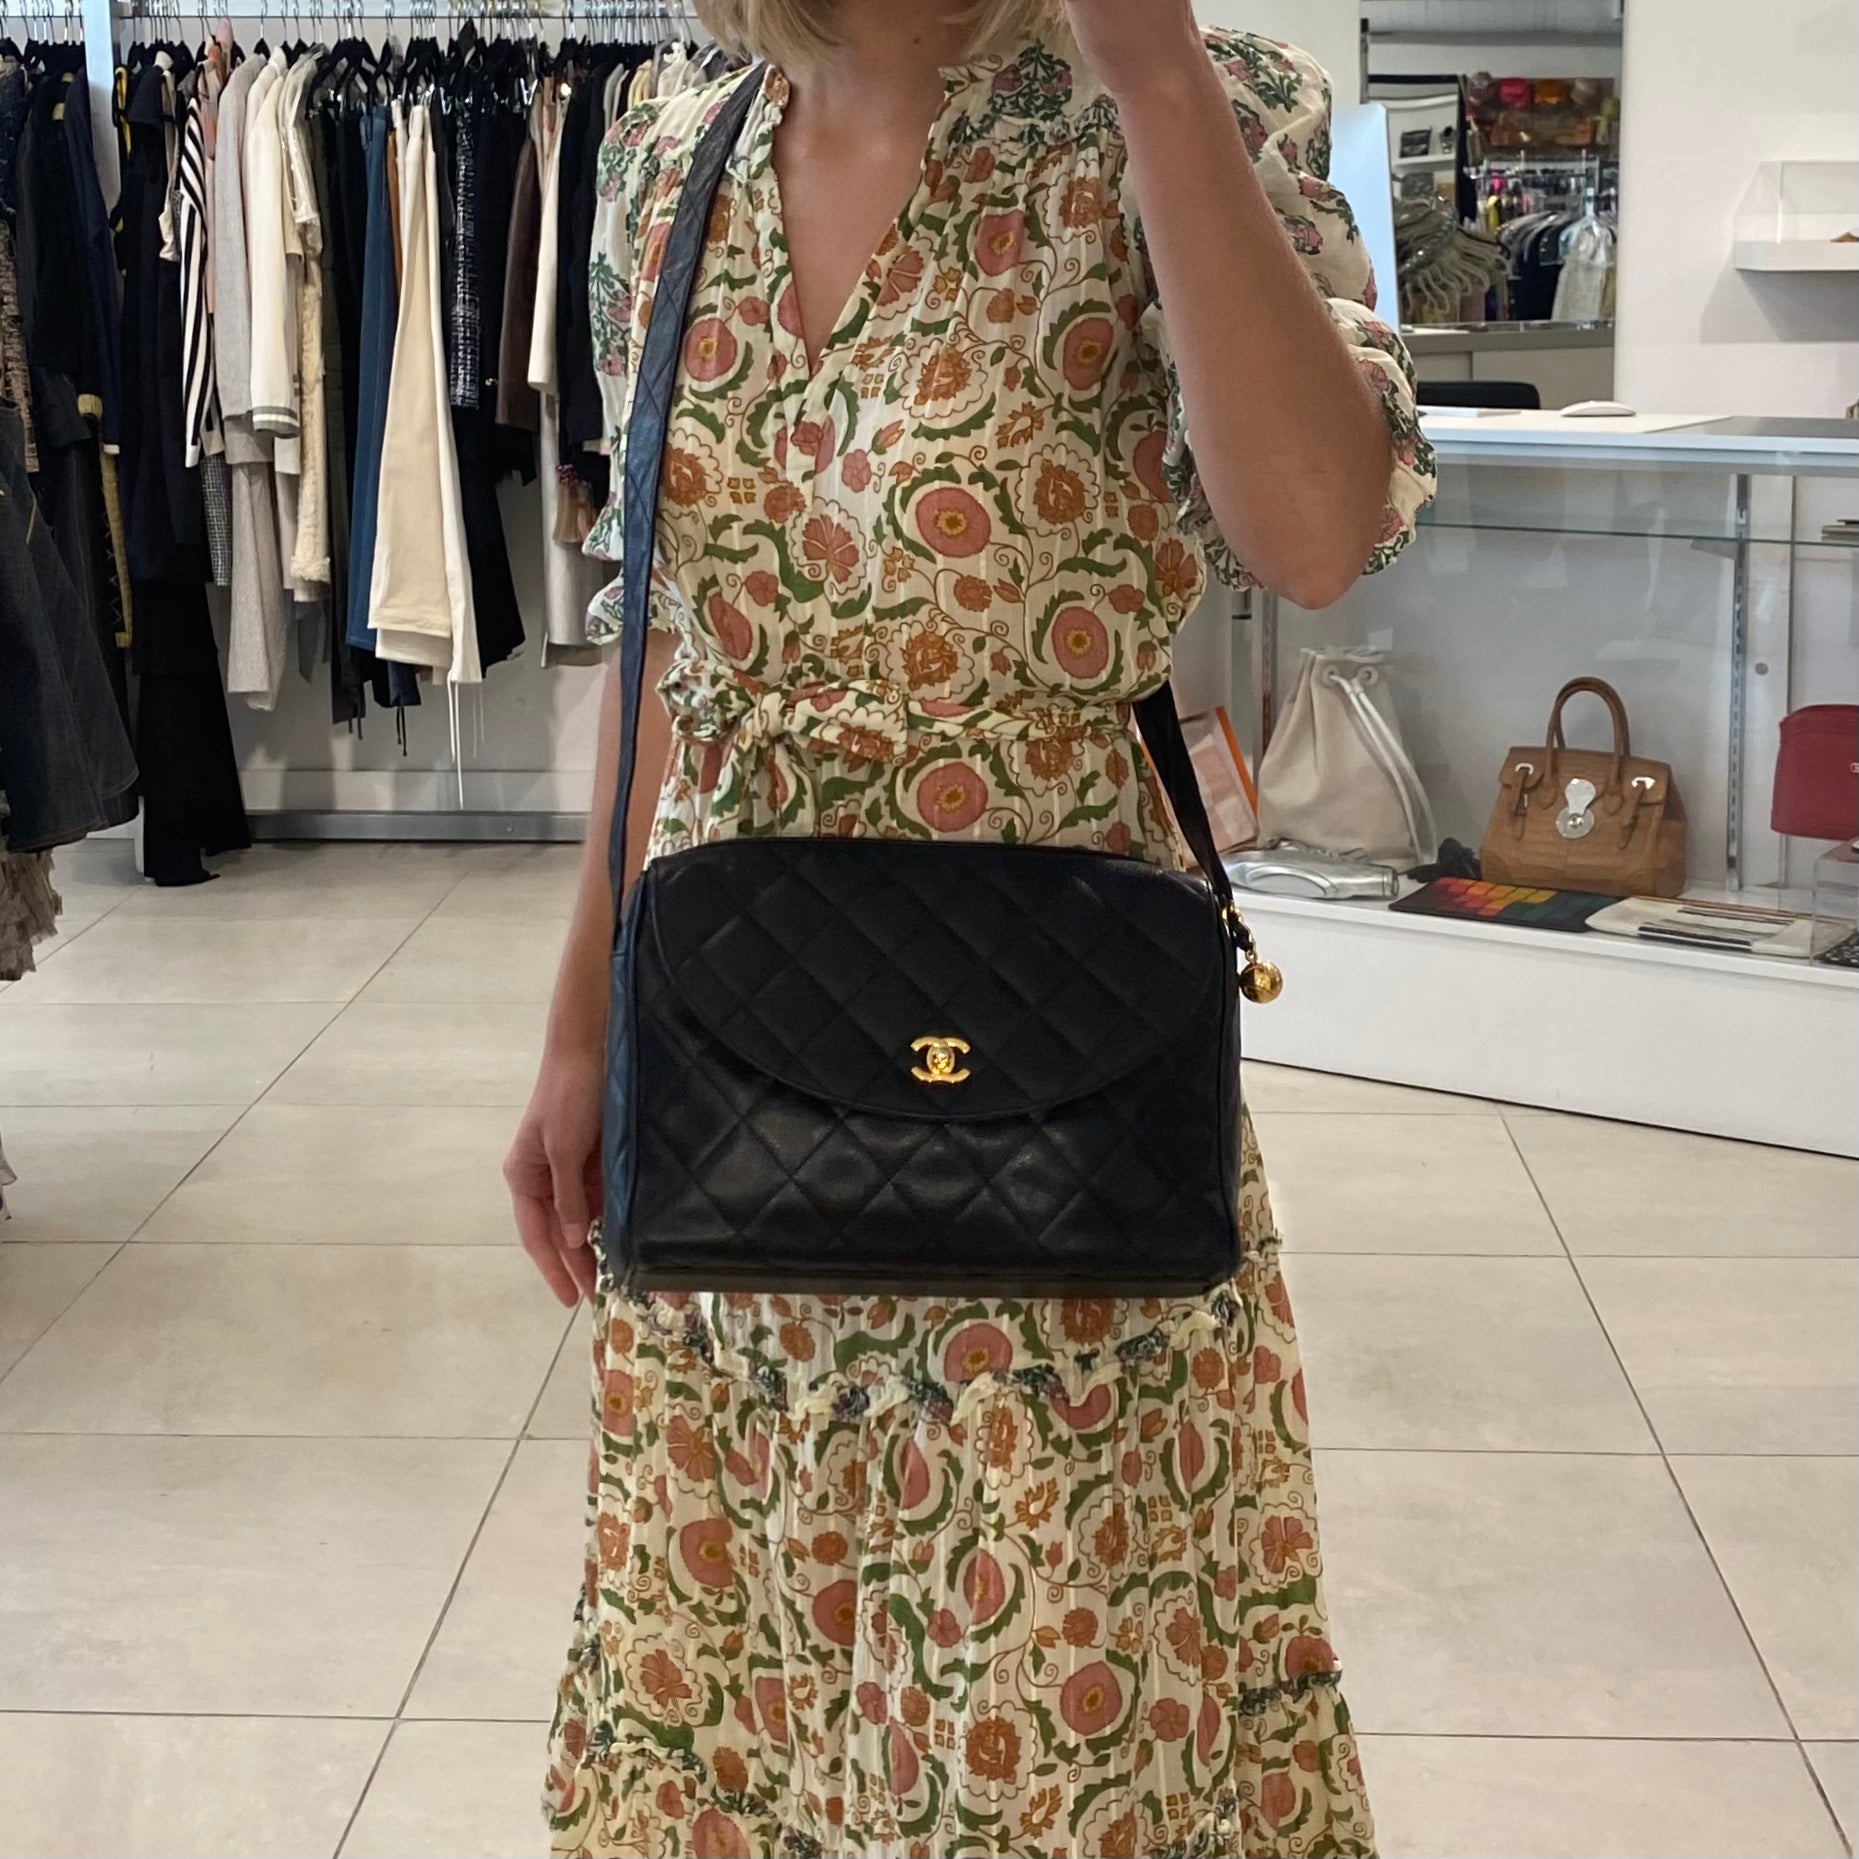 Chanel Vintage Black Camera Bag – Dina C's Fab and Funky